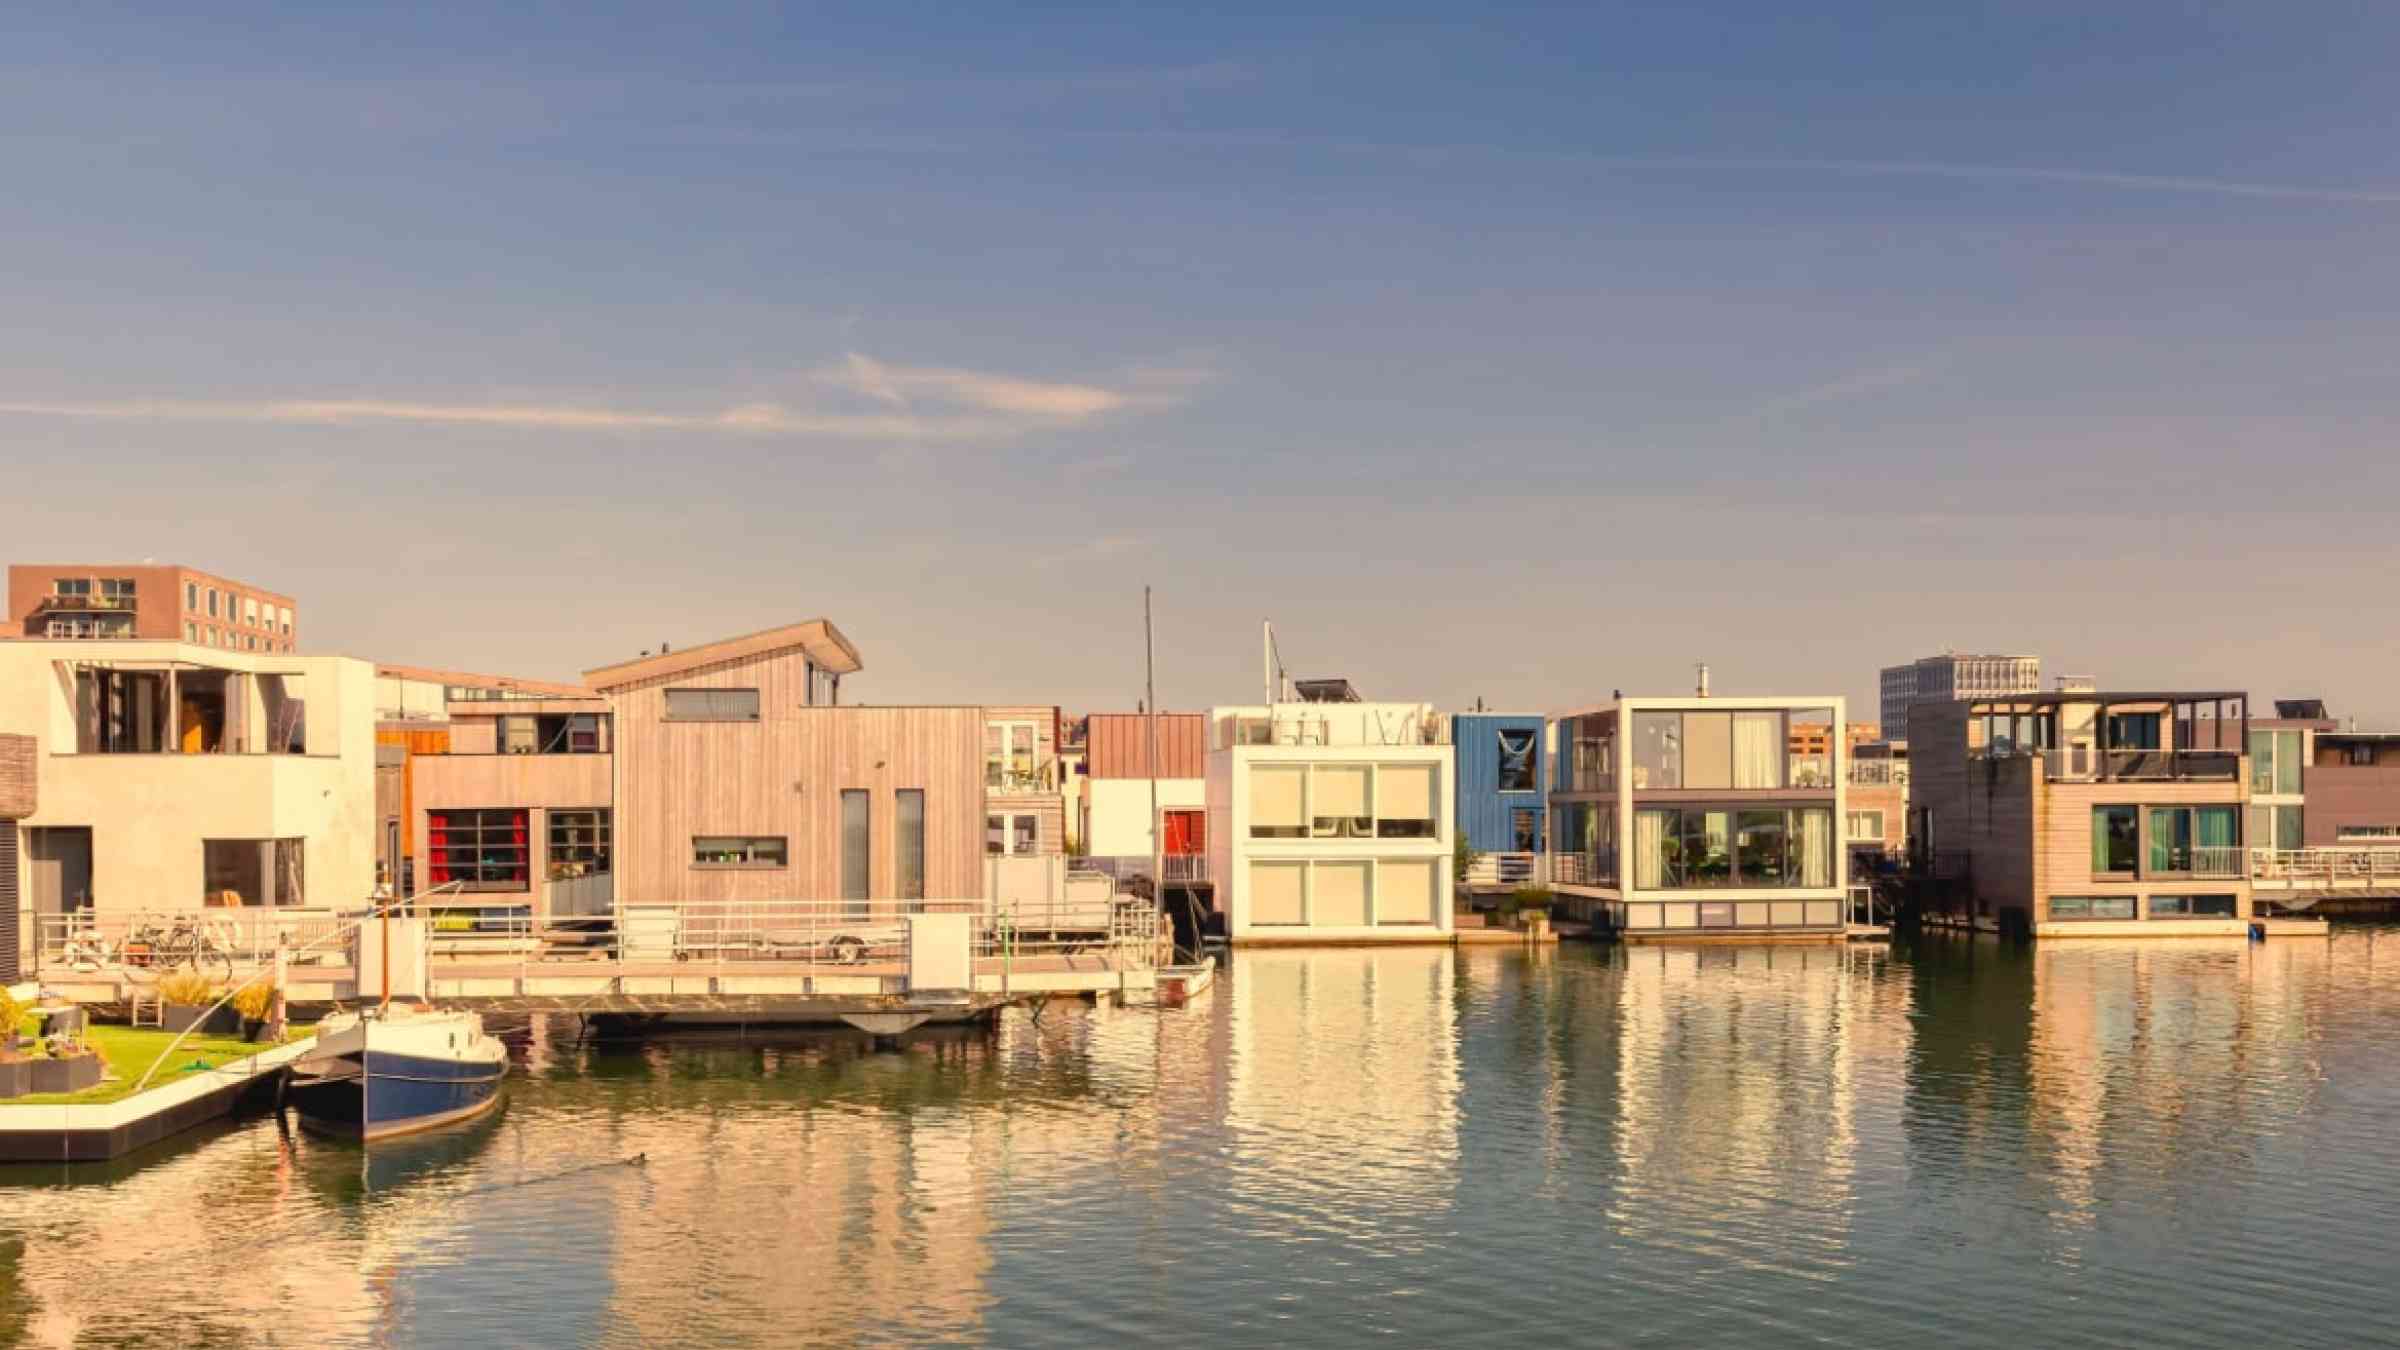 Row of contemporary houseboats in IJburg district at sunset in Amsterdam, Netherlands.